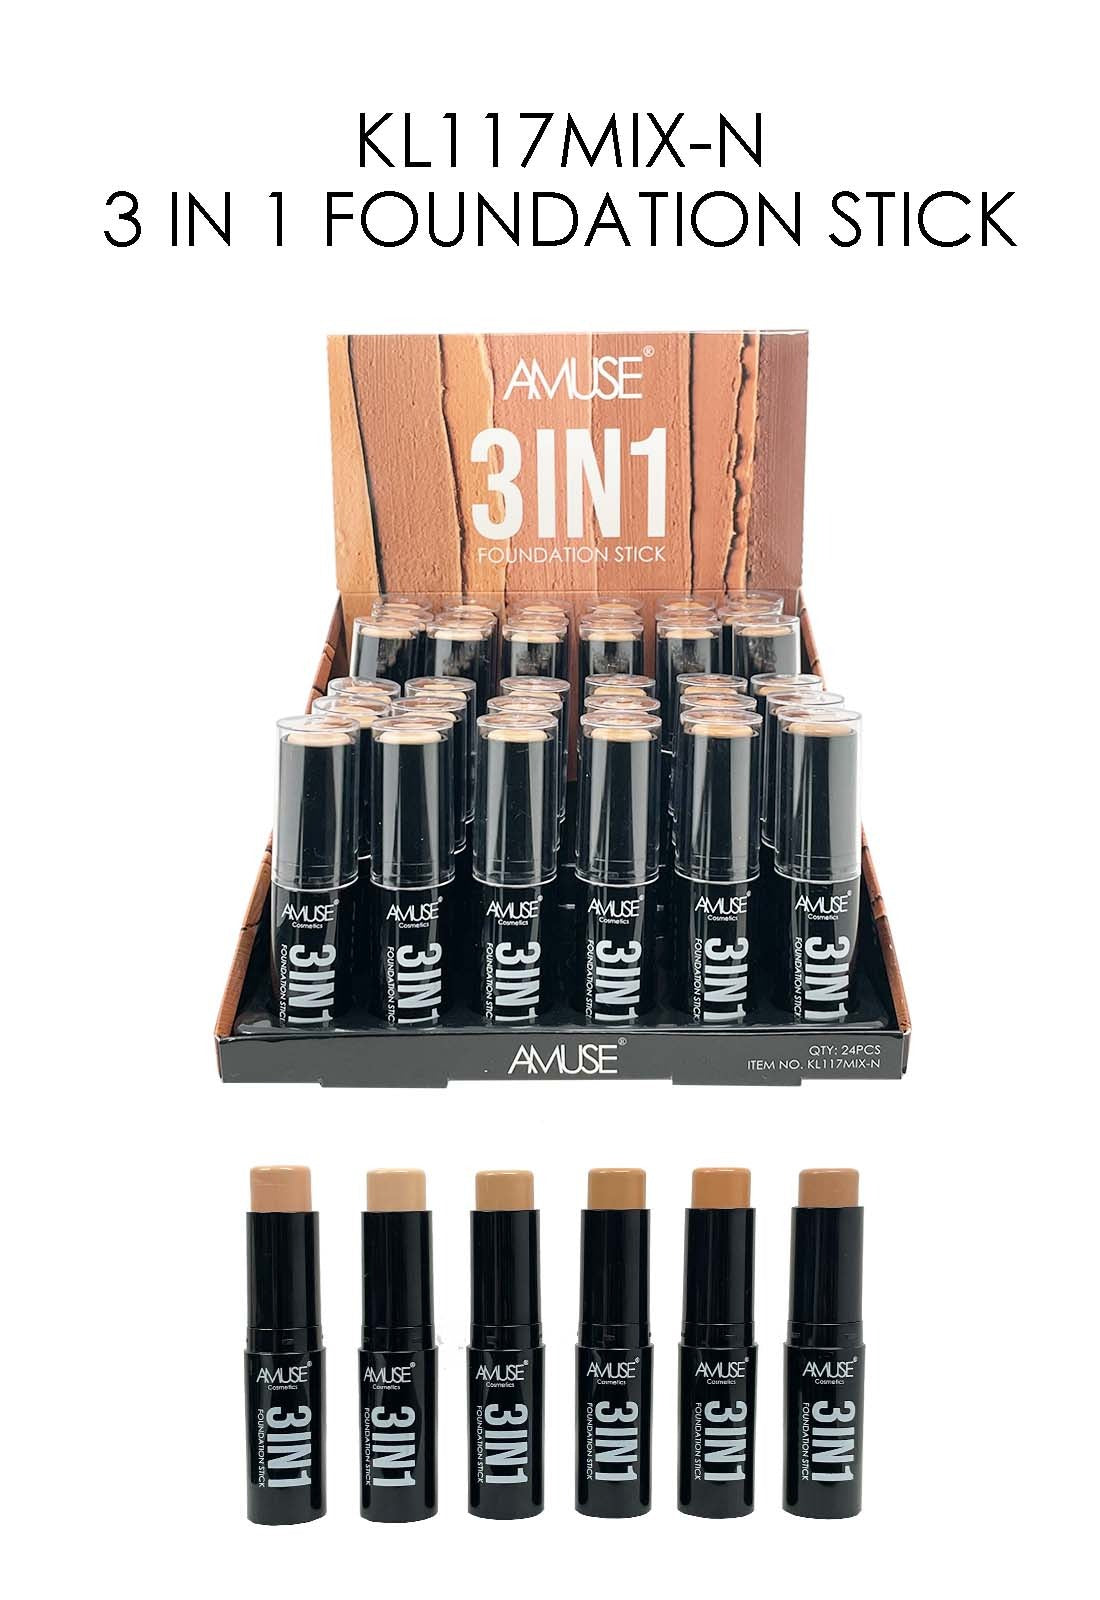 Amuse 3 IN 1 FOUNDATION STICK, Display